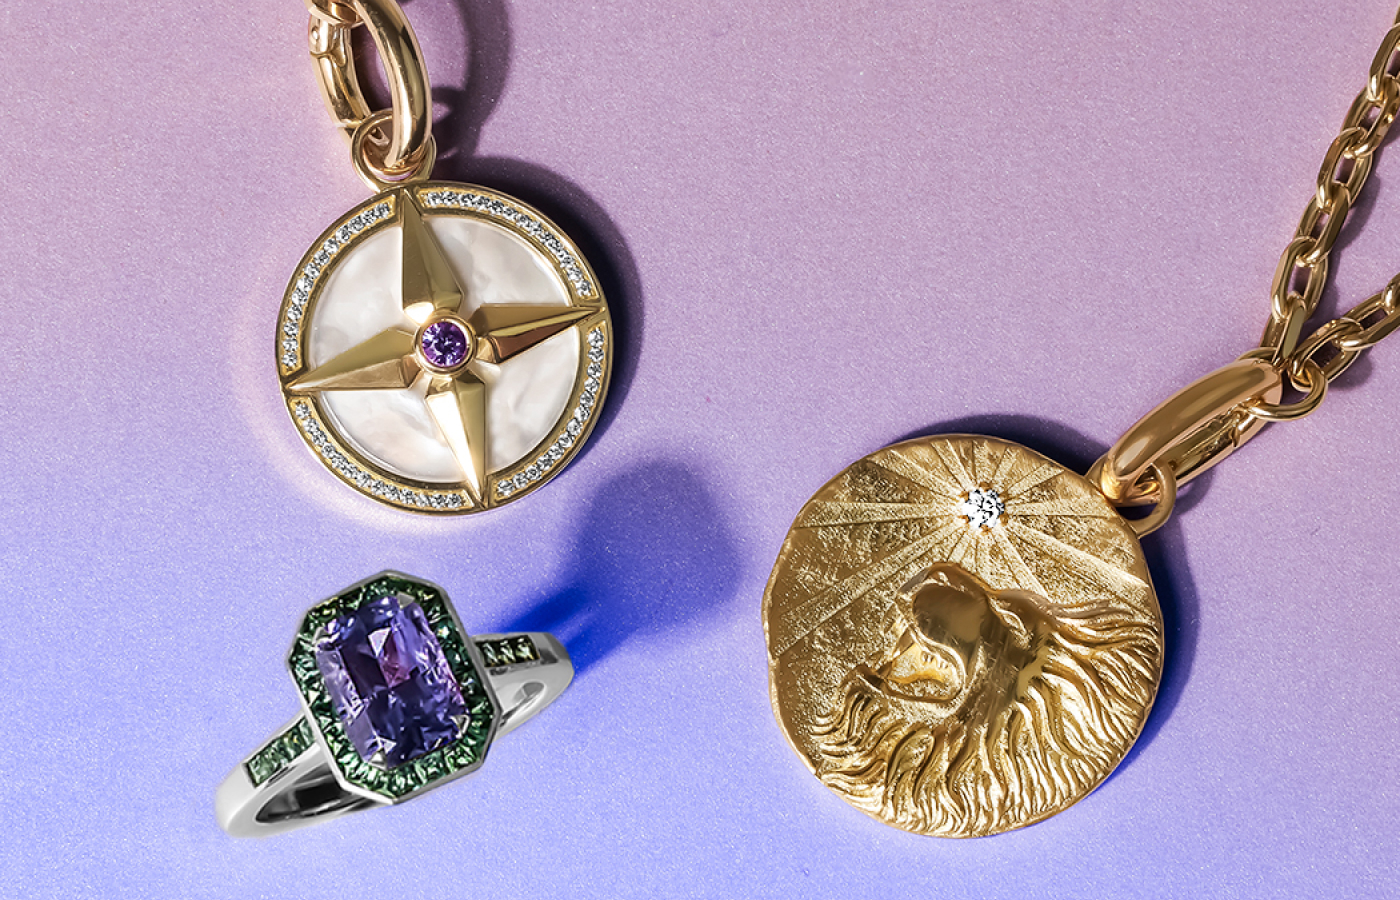 Pragnell Zodiac inspired jewels in gold, coloured gems and diamonds